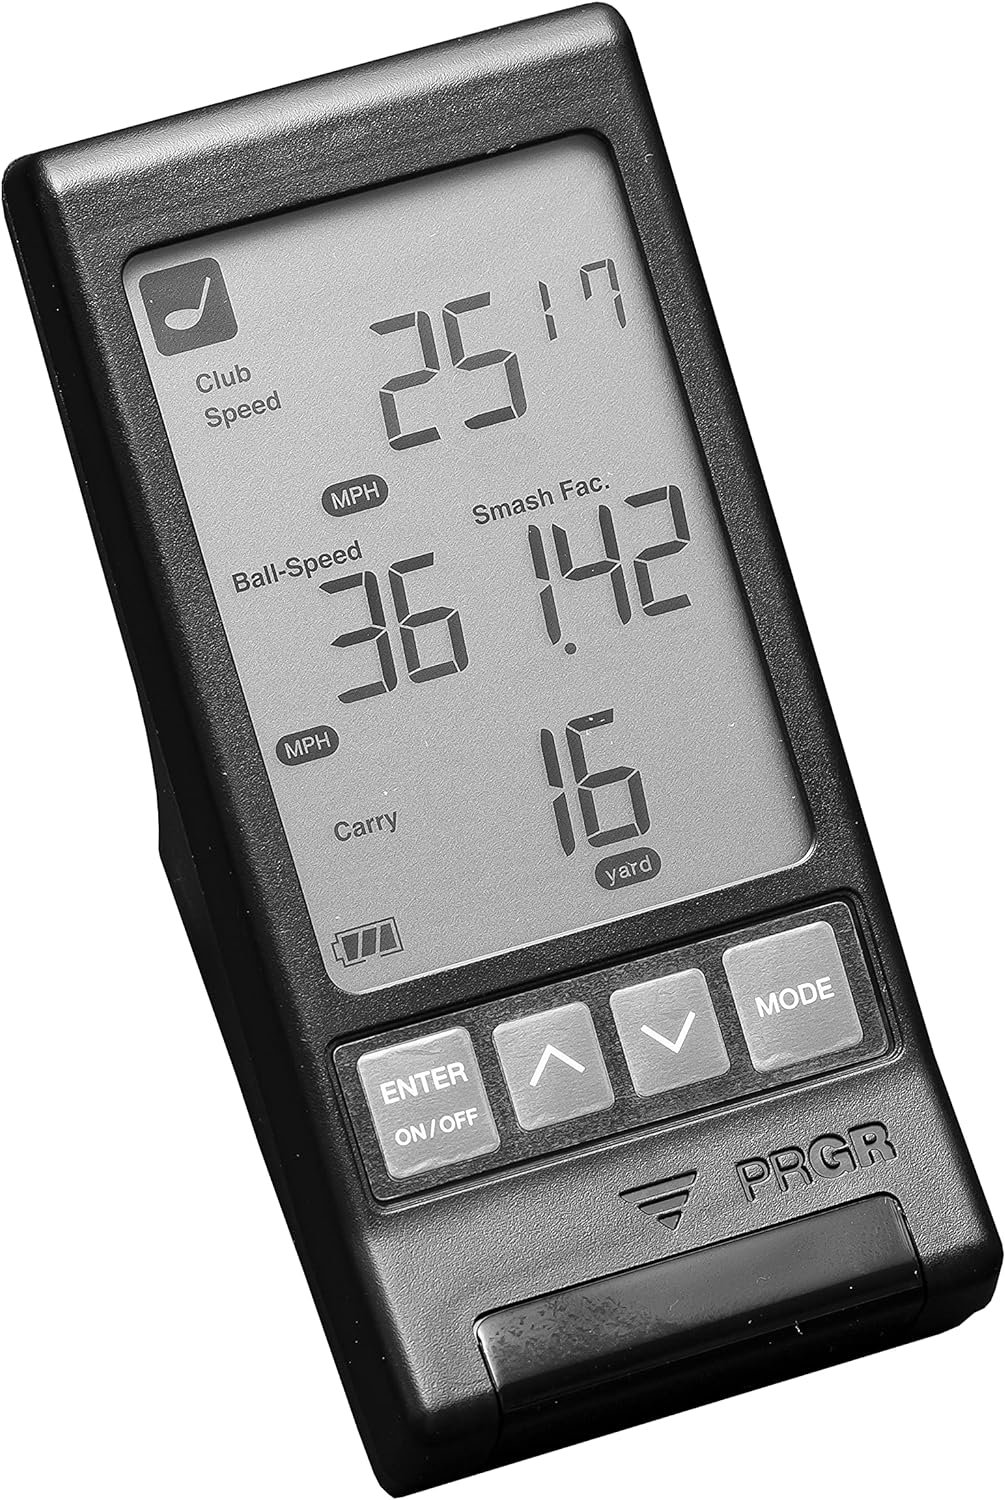 PRGR Black Pocket Launch Monitor HS-130A (New 2021 Model)